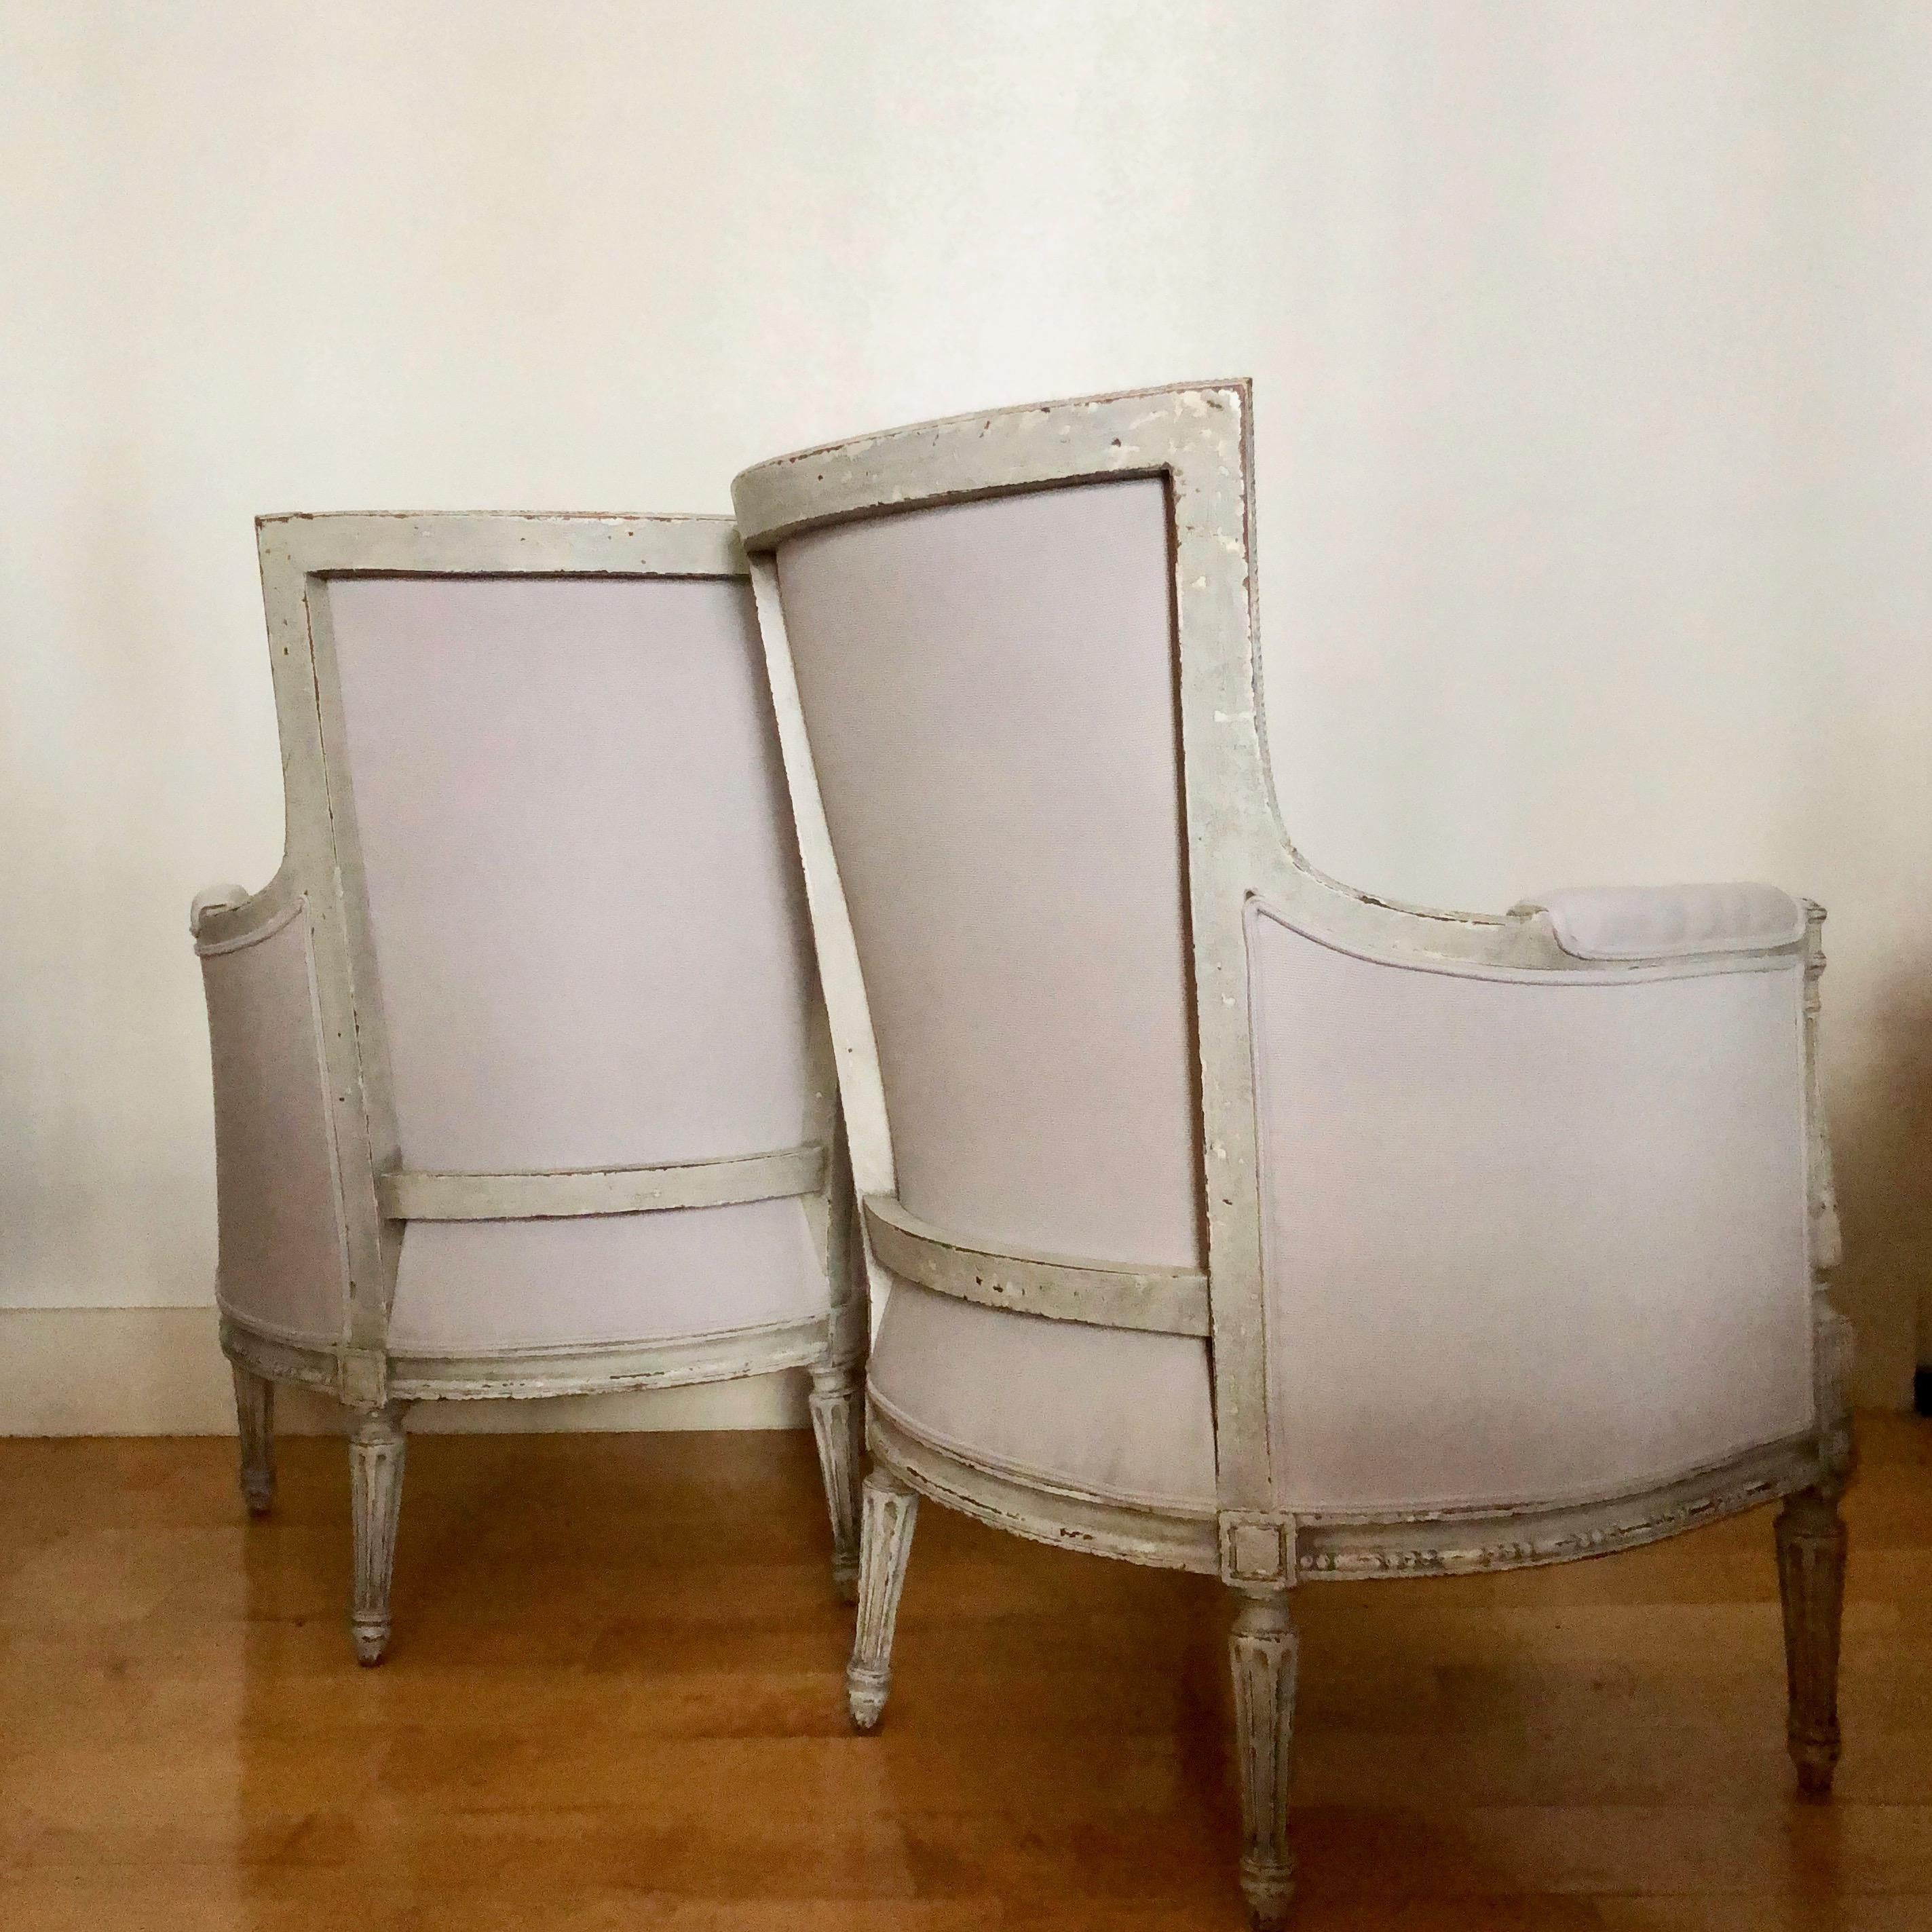 A pair of painted 19th century French Directoire style bergères. The horned backs (à cornes) are coved with side and top rails that curve inward to create horns at the corners and terminating in scrolls, the armrests consoles baluster shaped, the